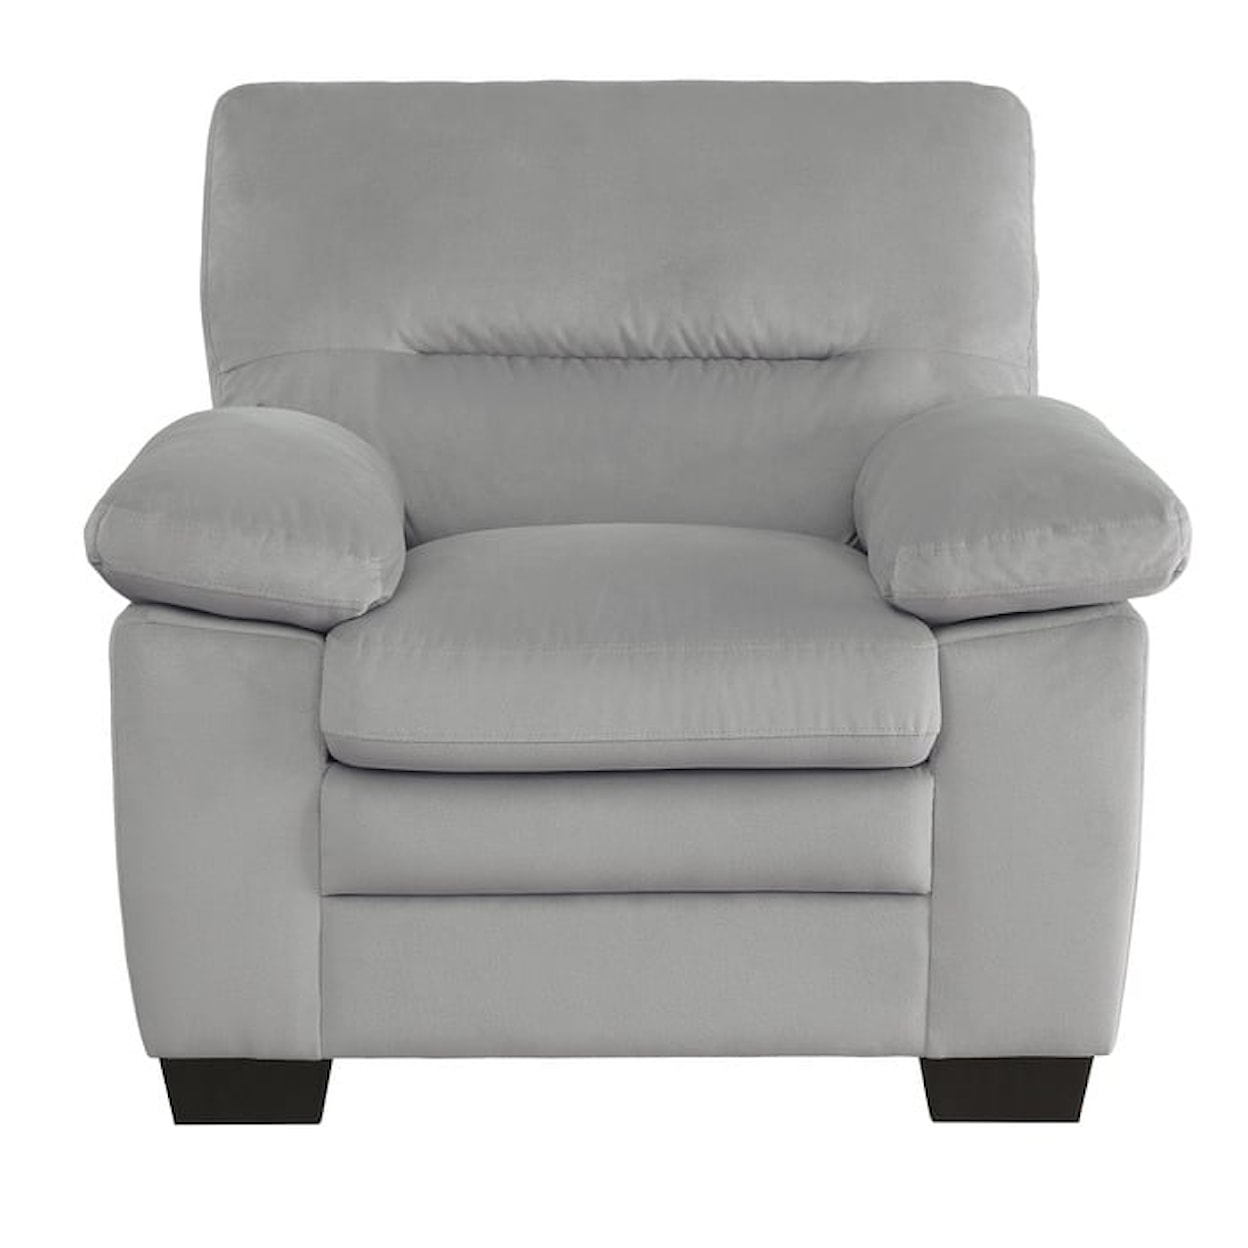 Homelegance Furniture Keighly Accent Chair